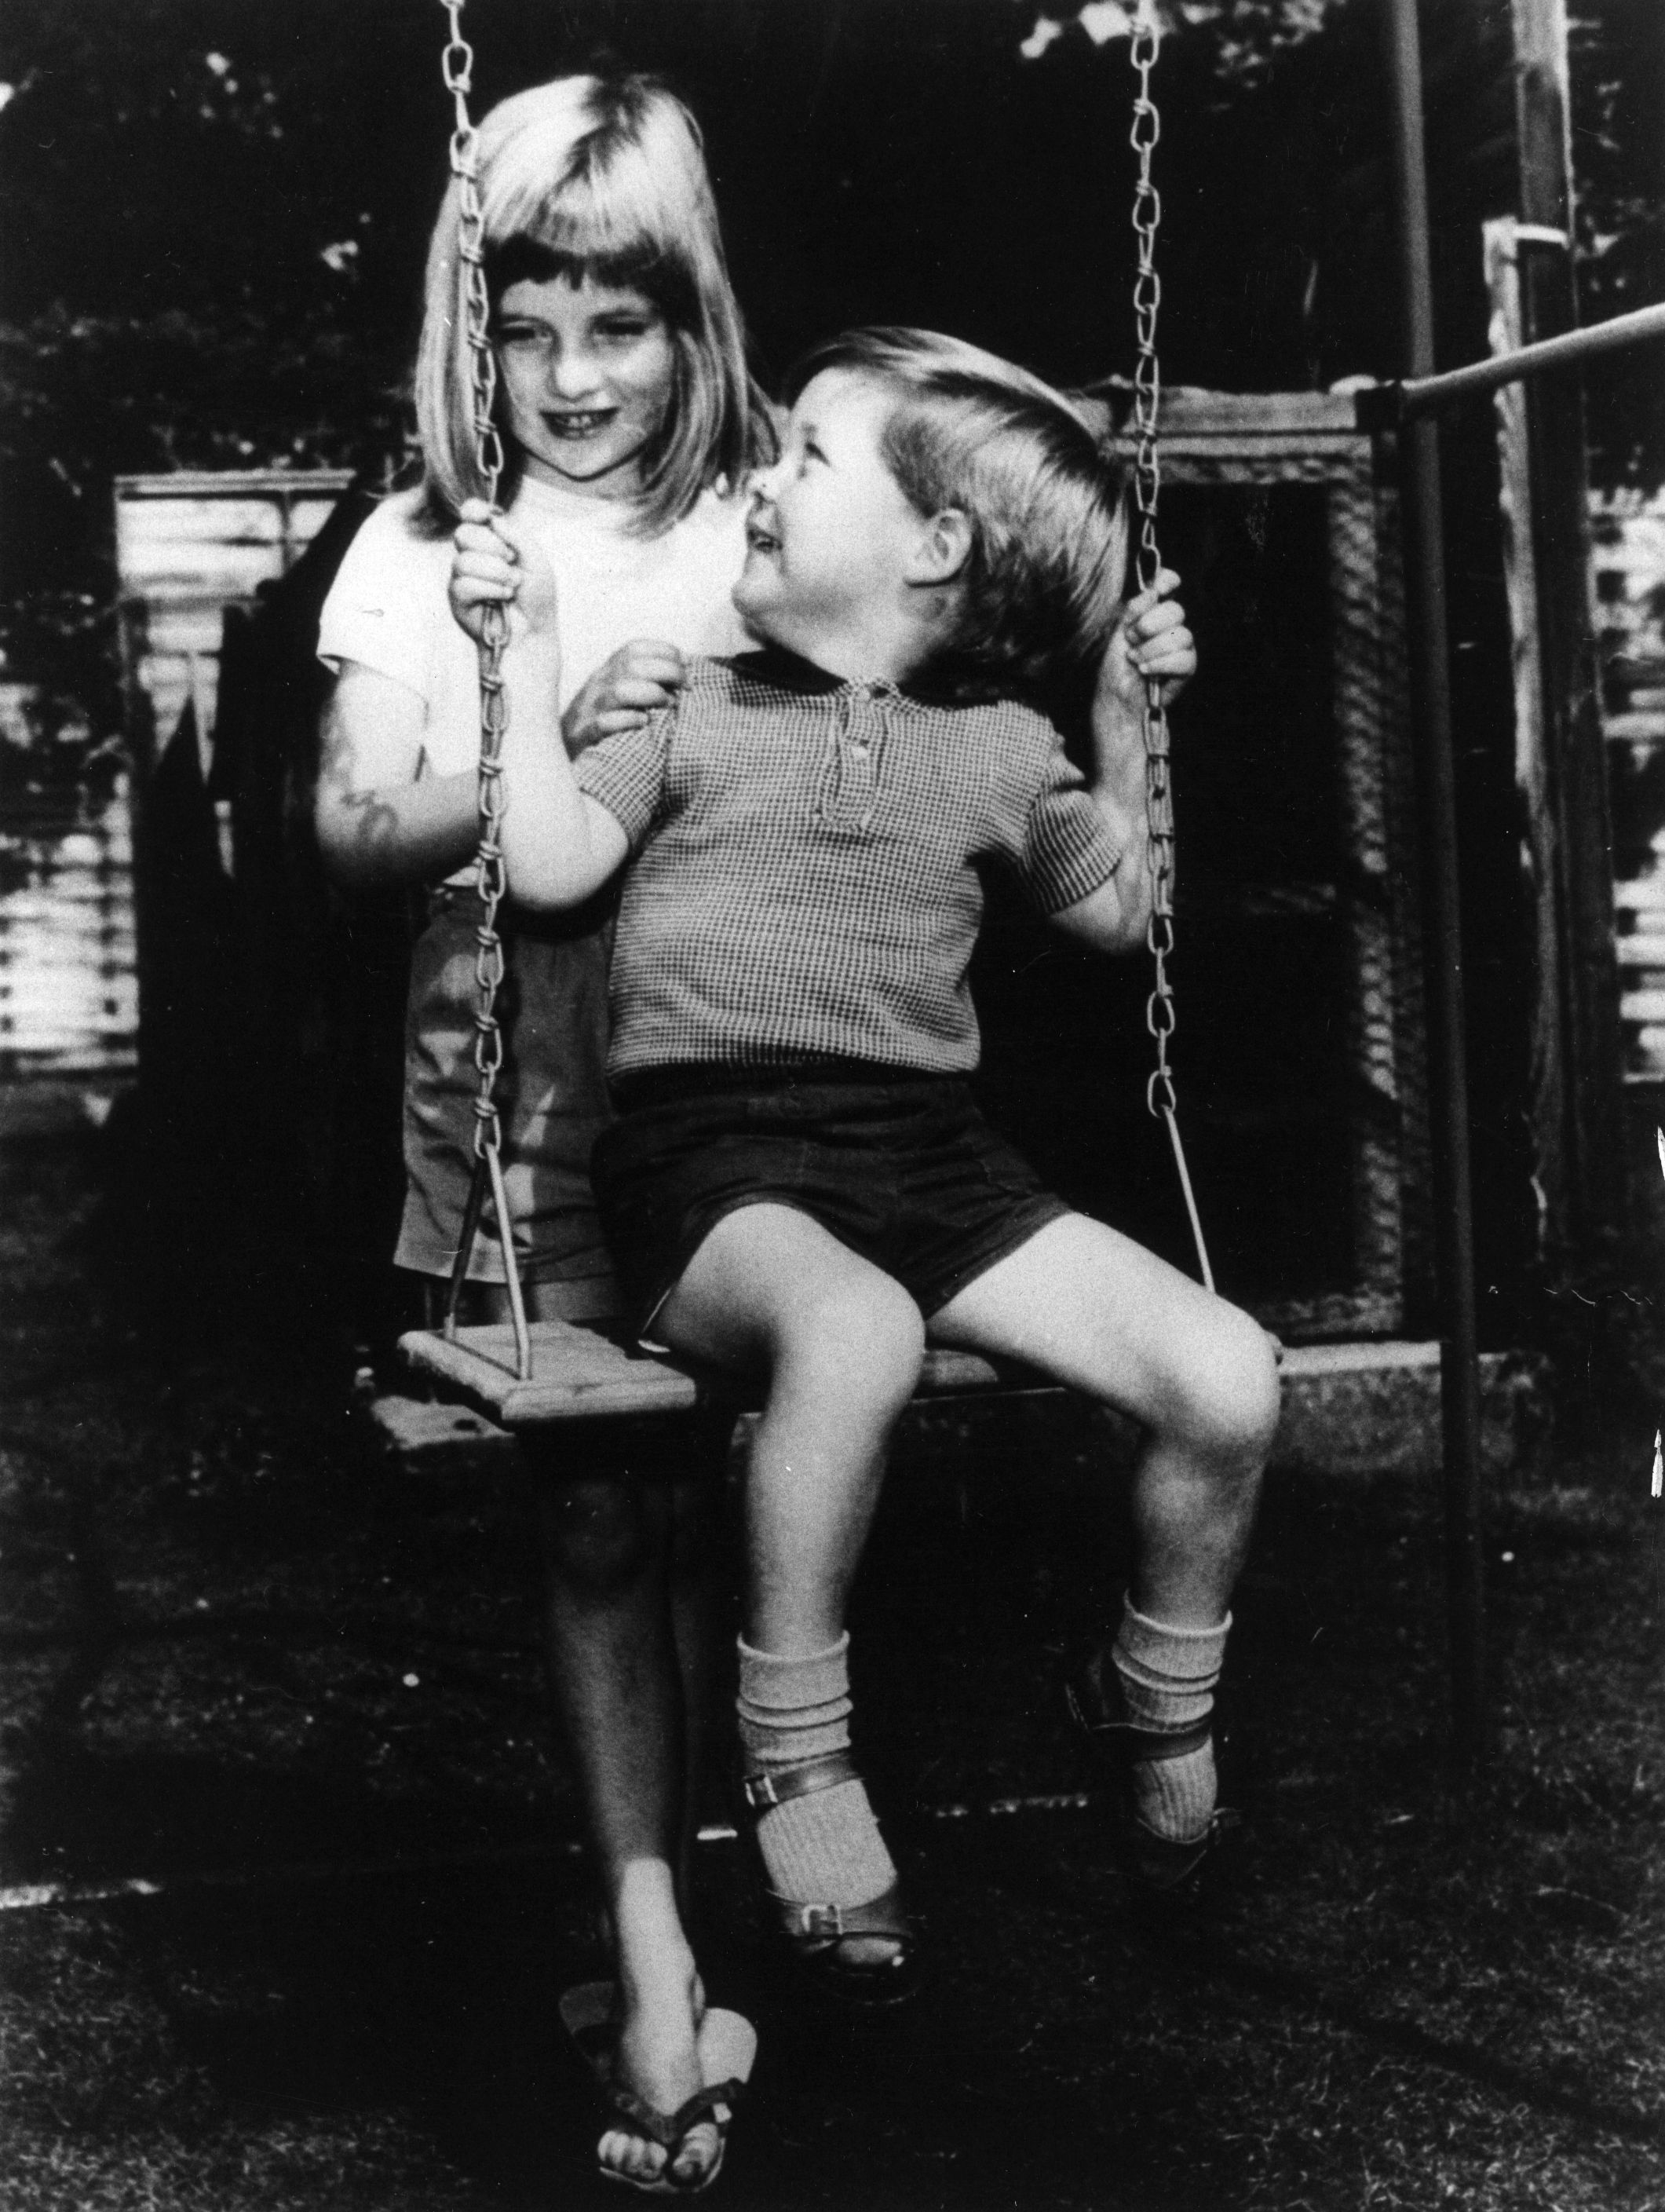 Lady Diana Spencer pictured playing with her brother Charles Edward, the Viscount Althorp, in the grounds of Park House, Sandringham. / Source: Getty Images